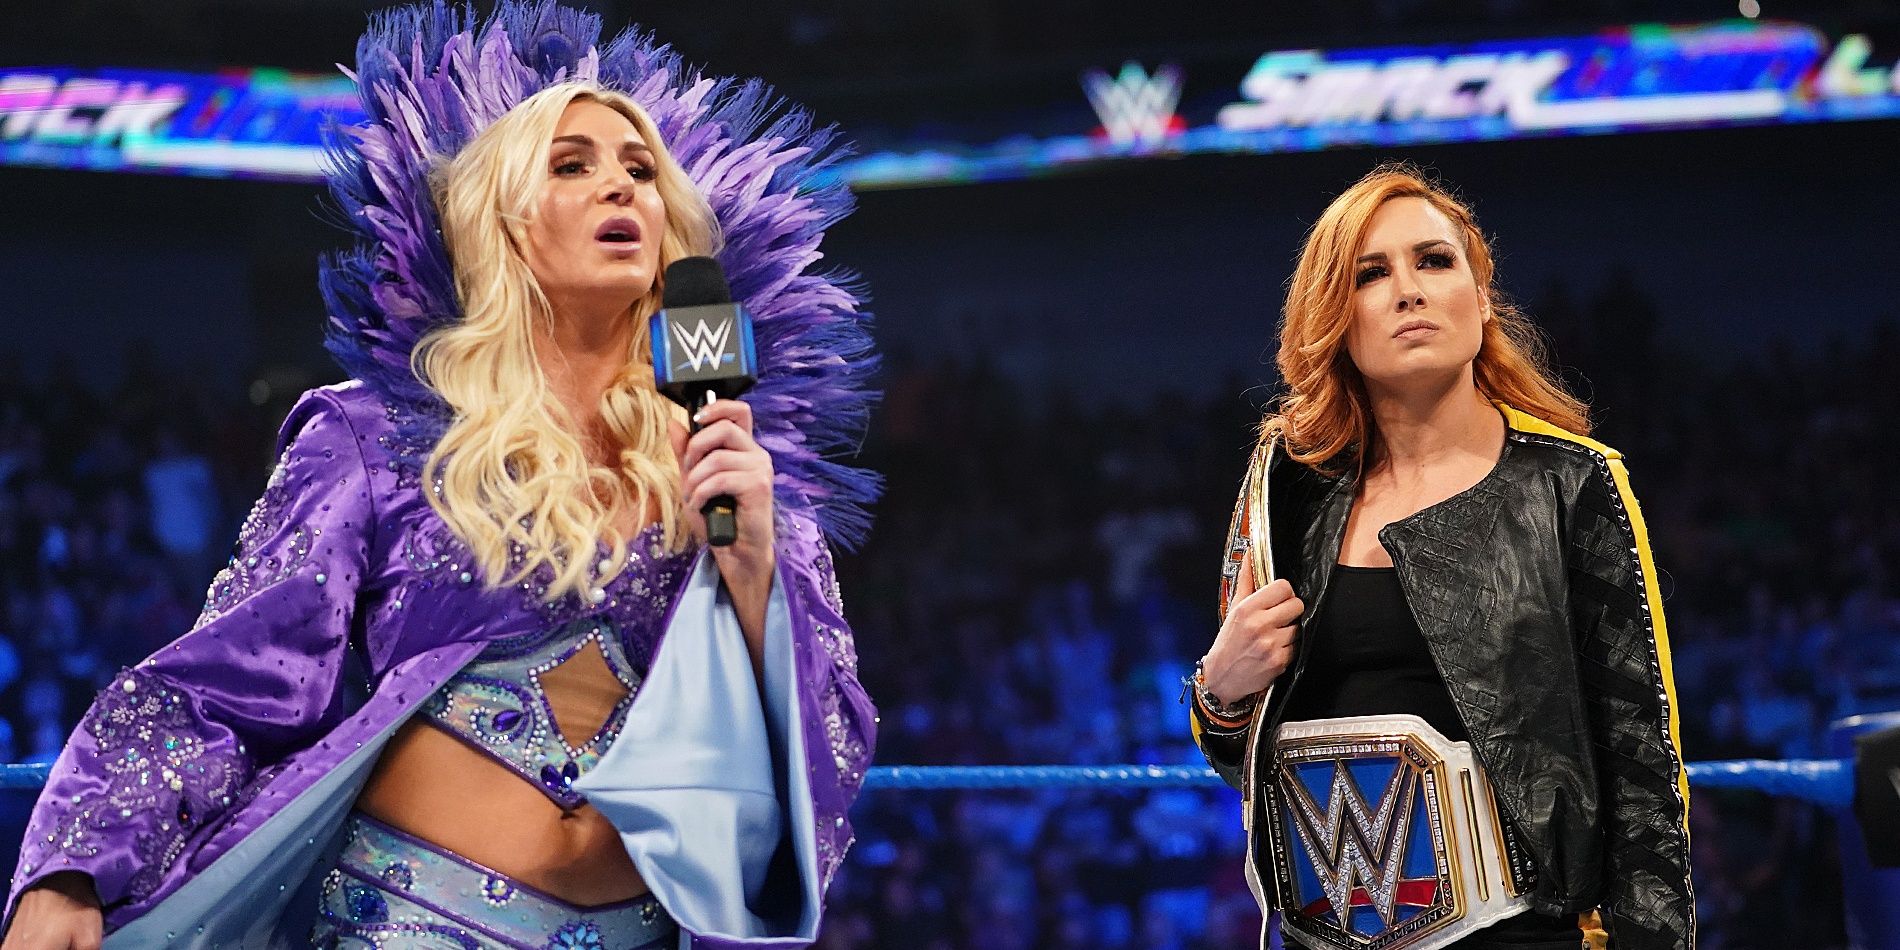 Becky Lynch and Charlotte Flair promo segment 